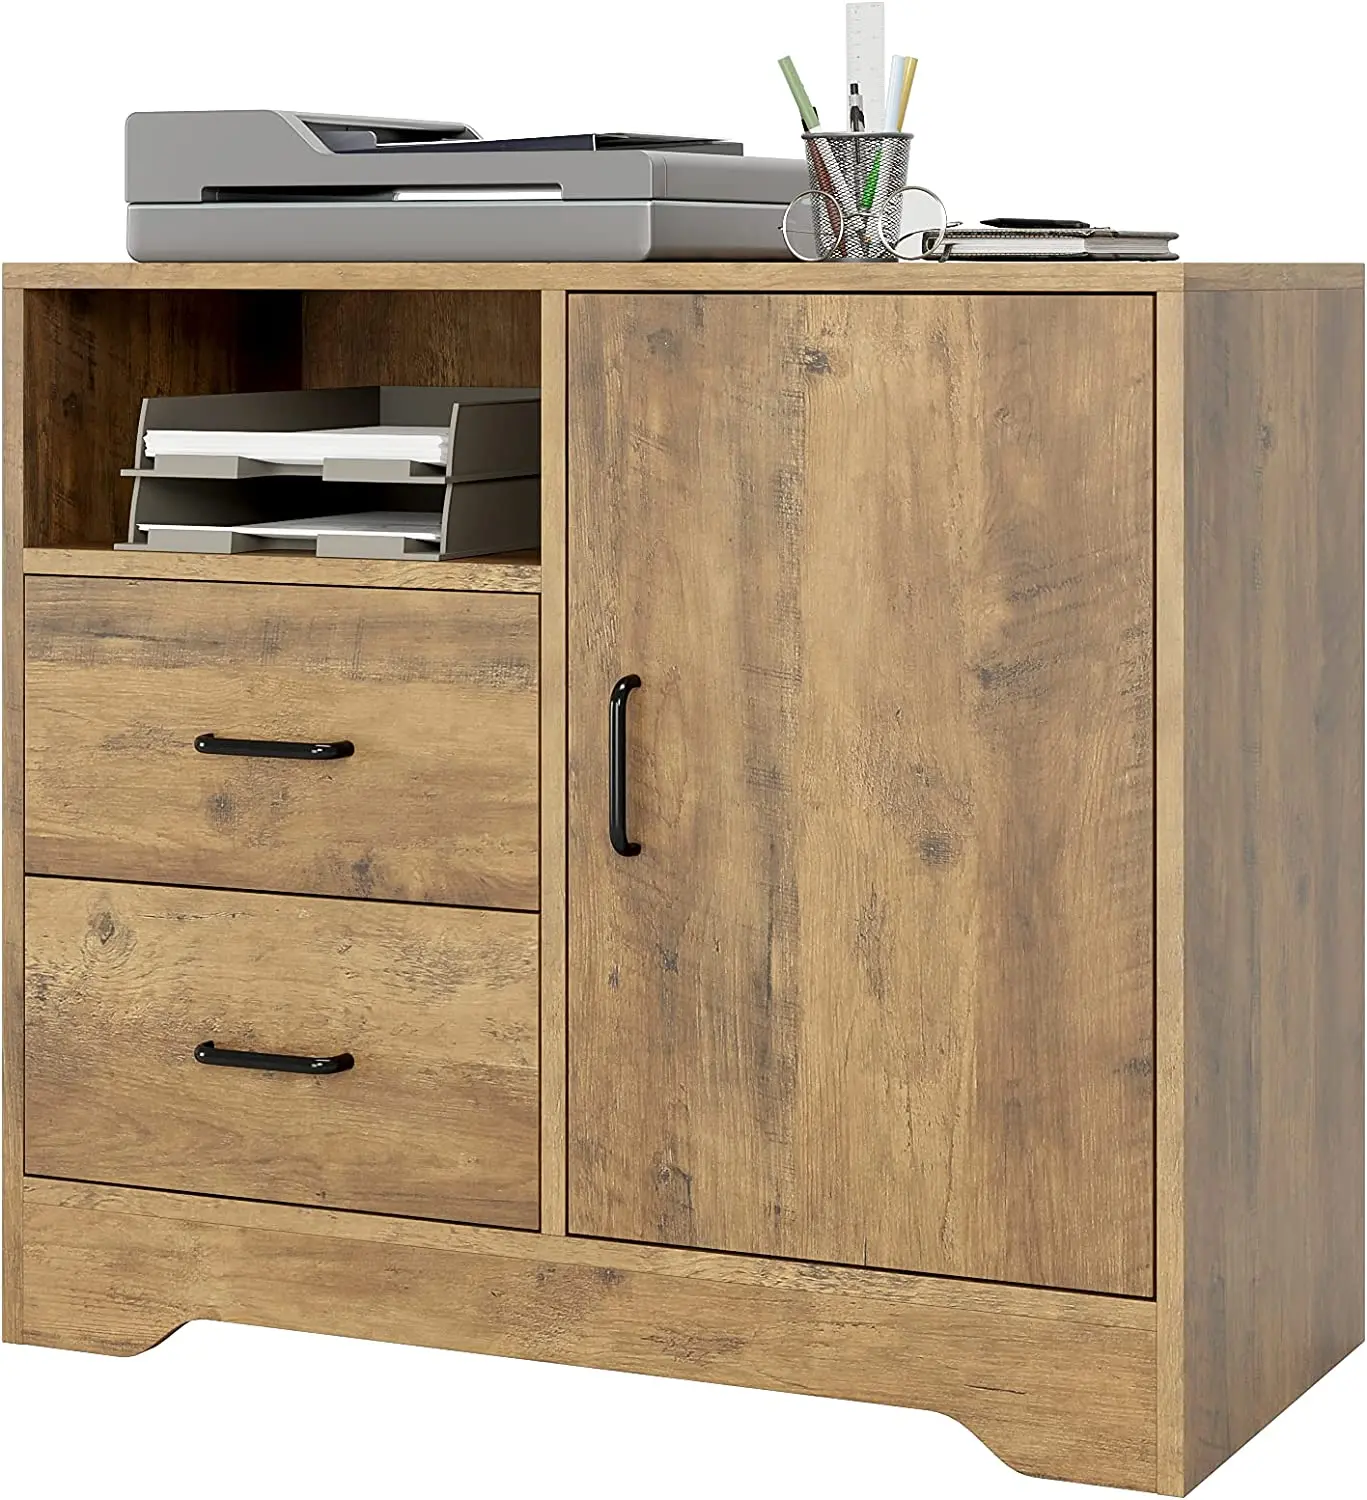 

Storage Cabinet with 2 Drawers and Doors with Adjustable Shelves for Office Cabinets Bedroom Living Room Kitchen Drawer Dresser